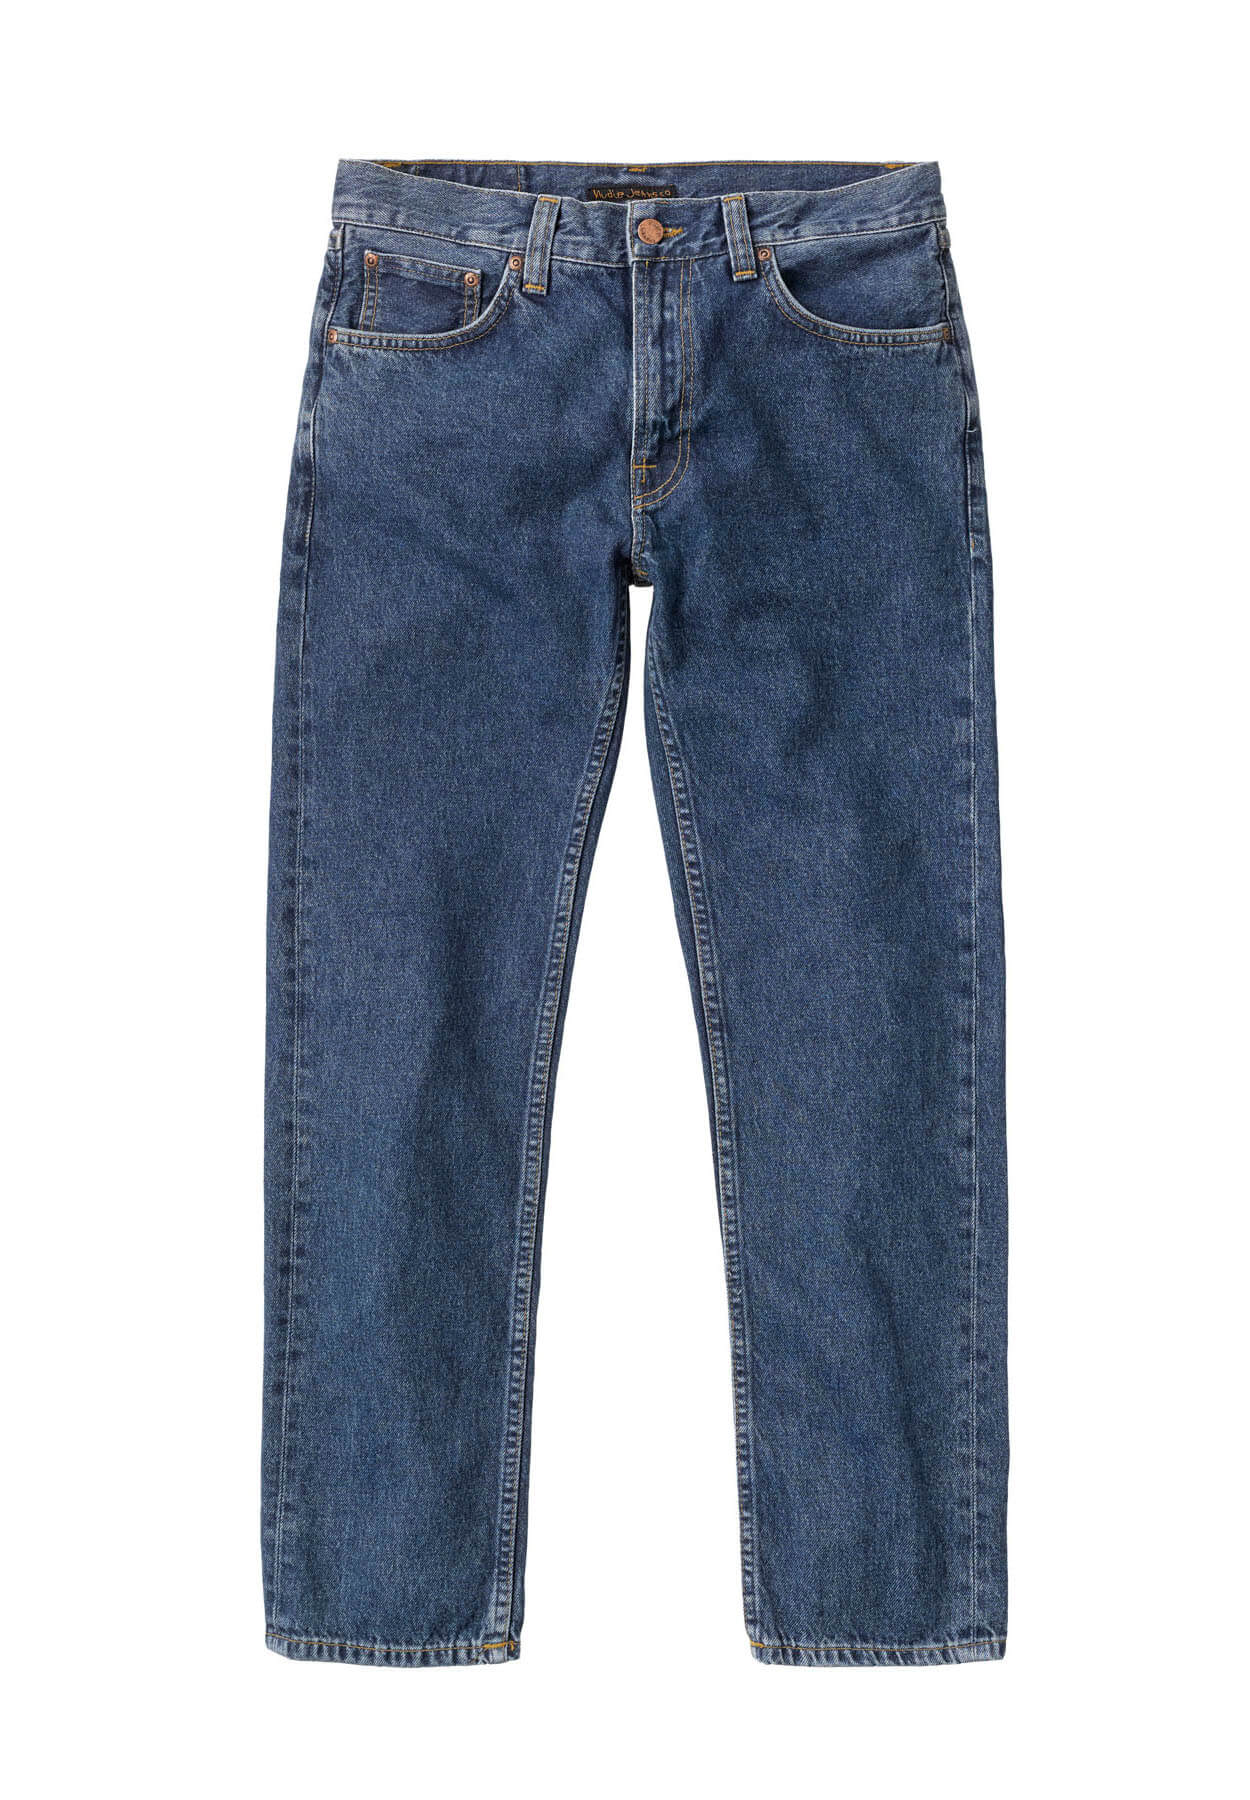 NUDIE JEANS Jeans Gritty Jackson 90s Stone 32/30